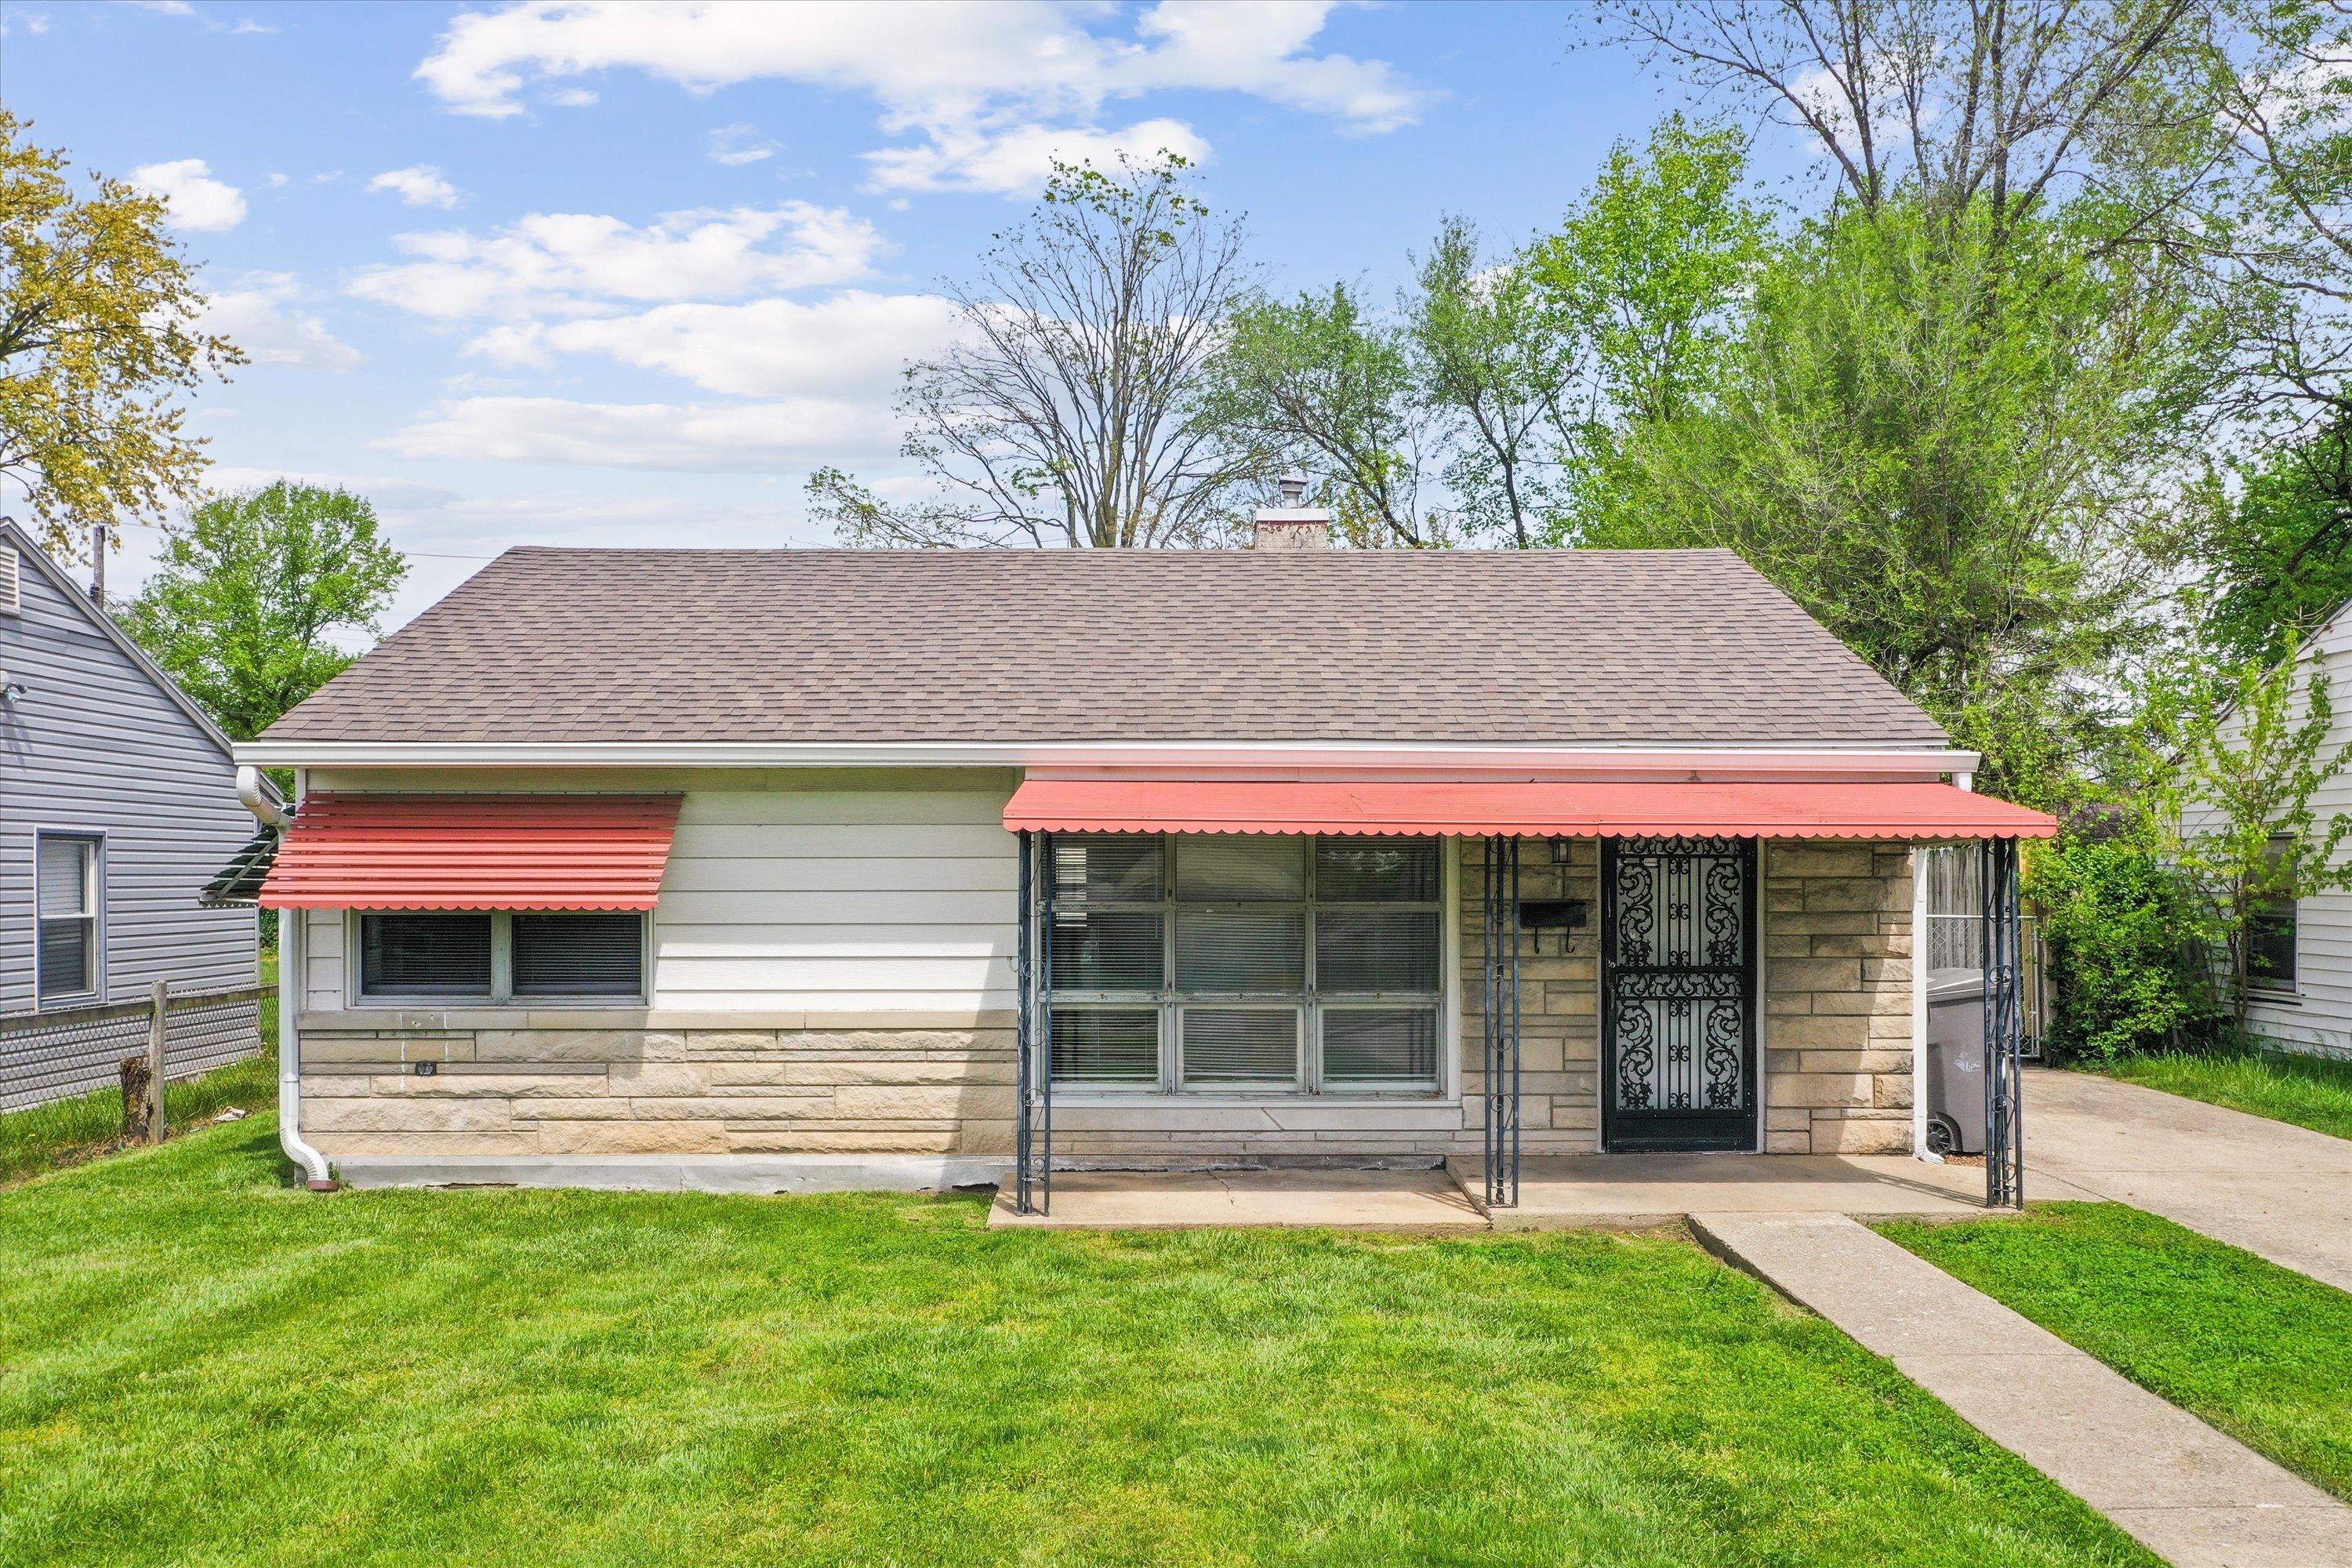 Photo one of 722 Drake St Indianapolis IN 46202 | MLS 21974714